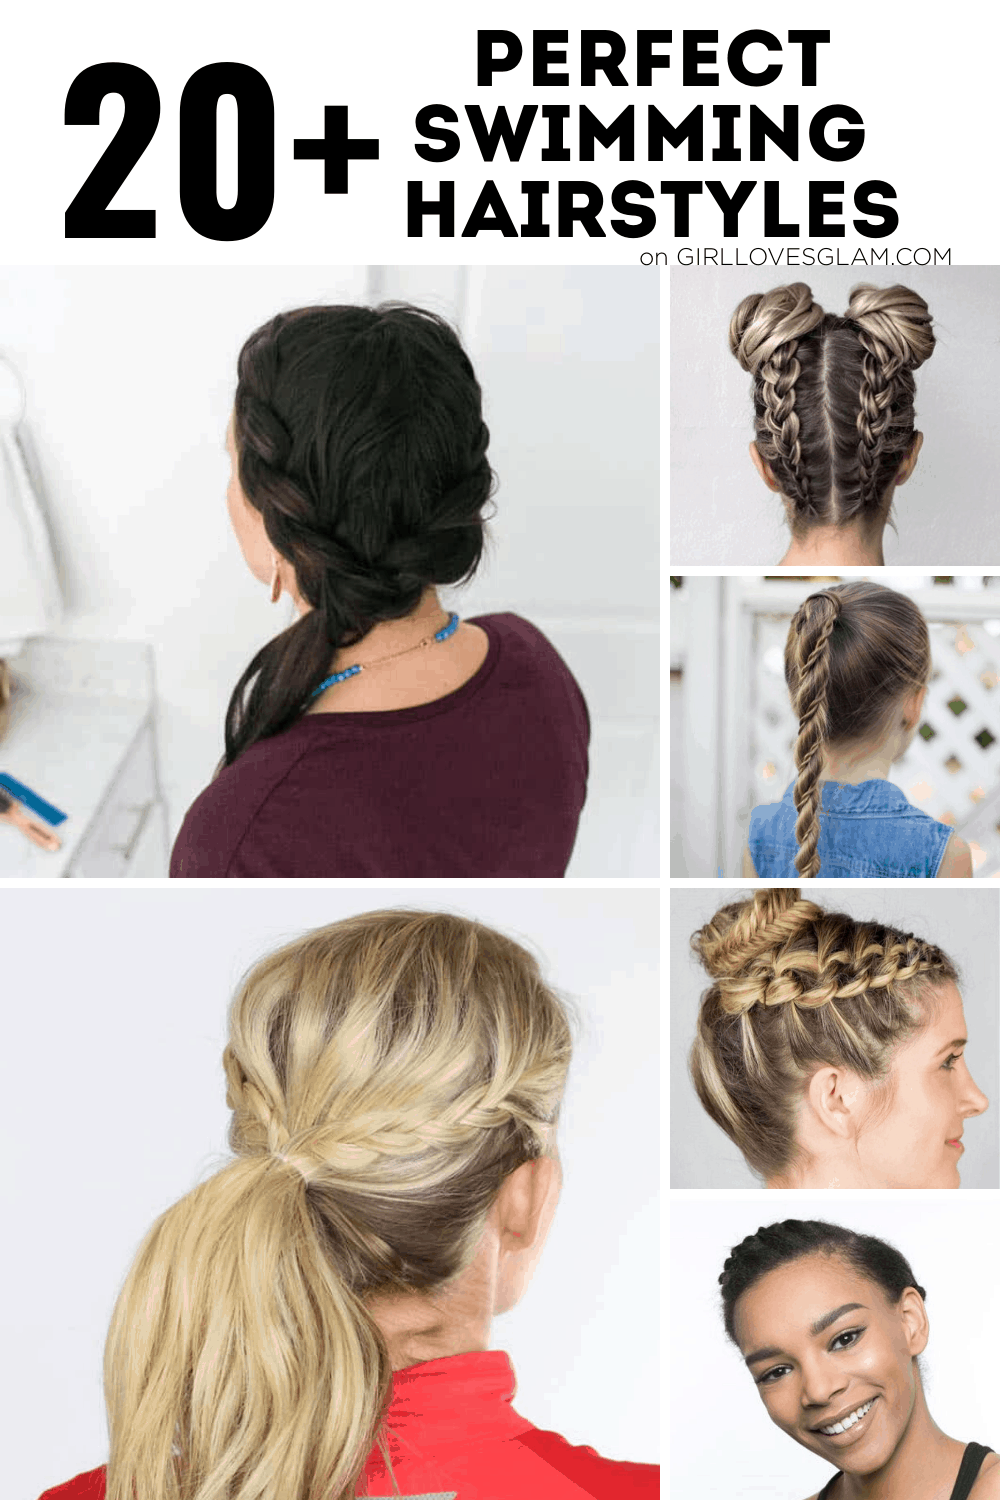 20 Perfect Swimming Hairstyles